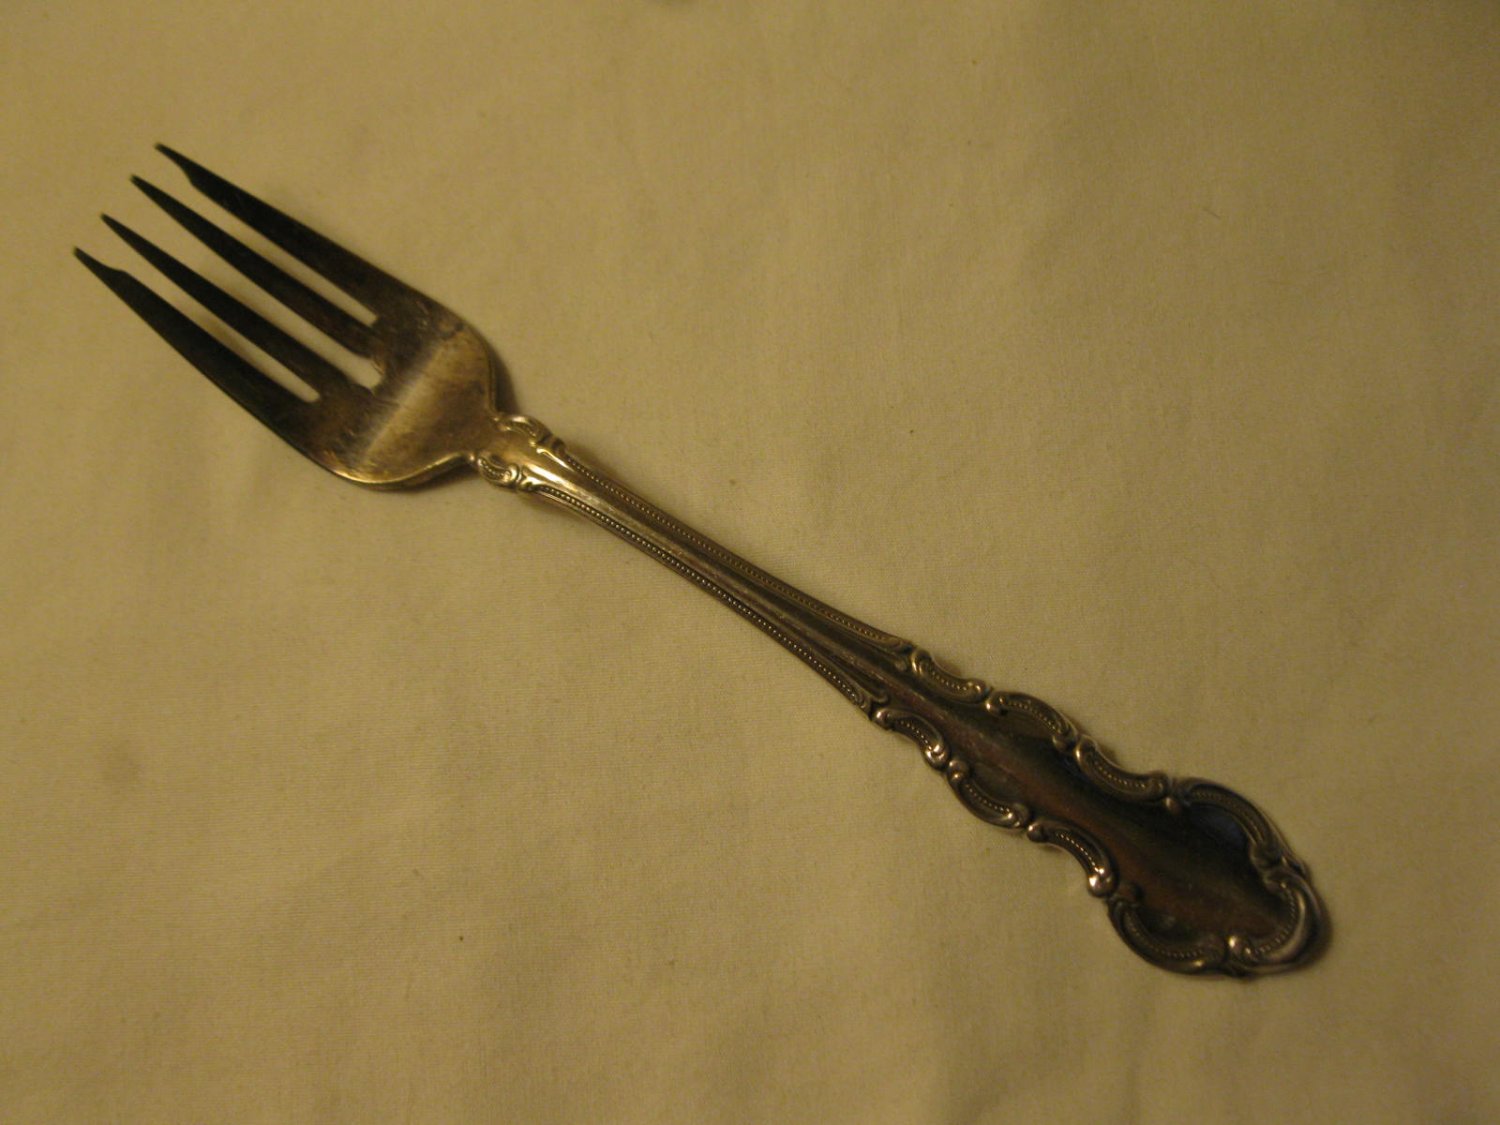 S.L. & G.H. Rogers co. 1981 Juliette Pattern Silver Plated 7" Table Fork #4